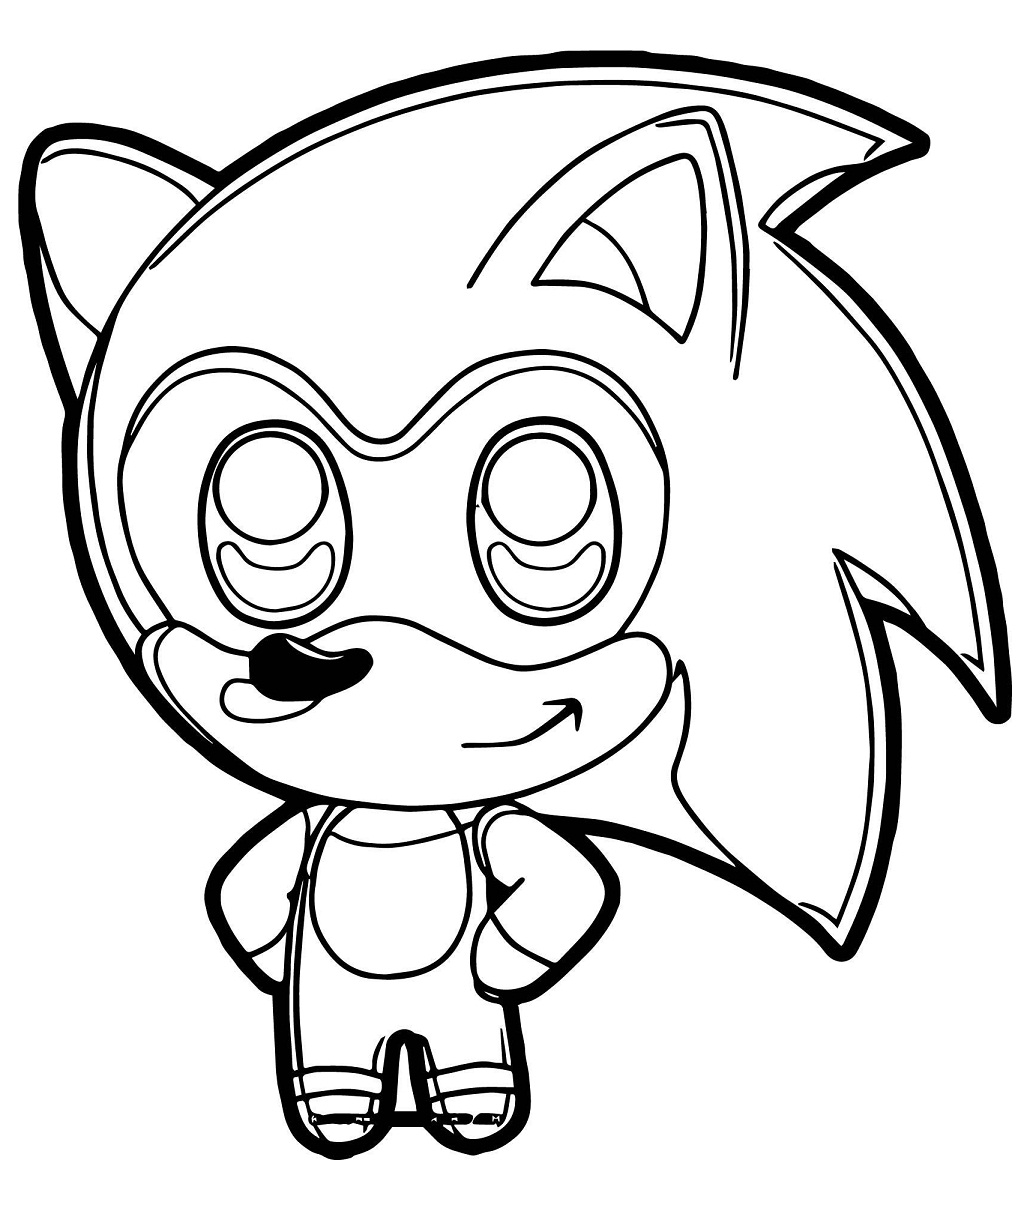 printable-sonic-coloring-pages-printable-sonic-coloring-pages-for-kids-lasnoticiasya4julio